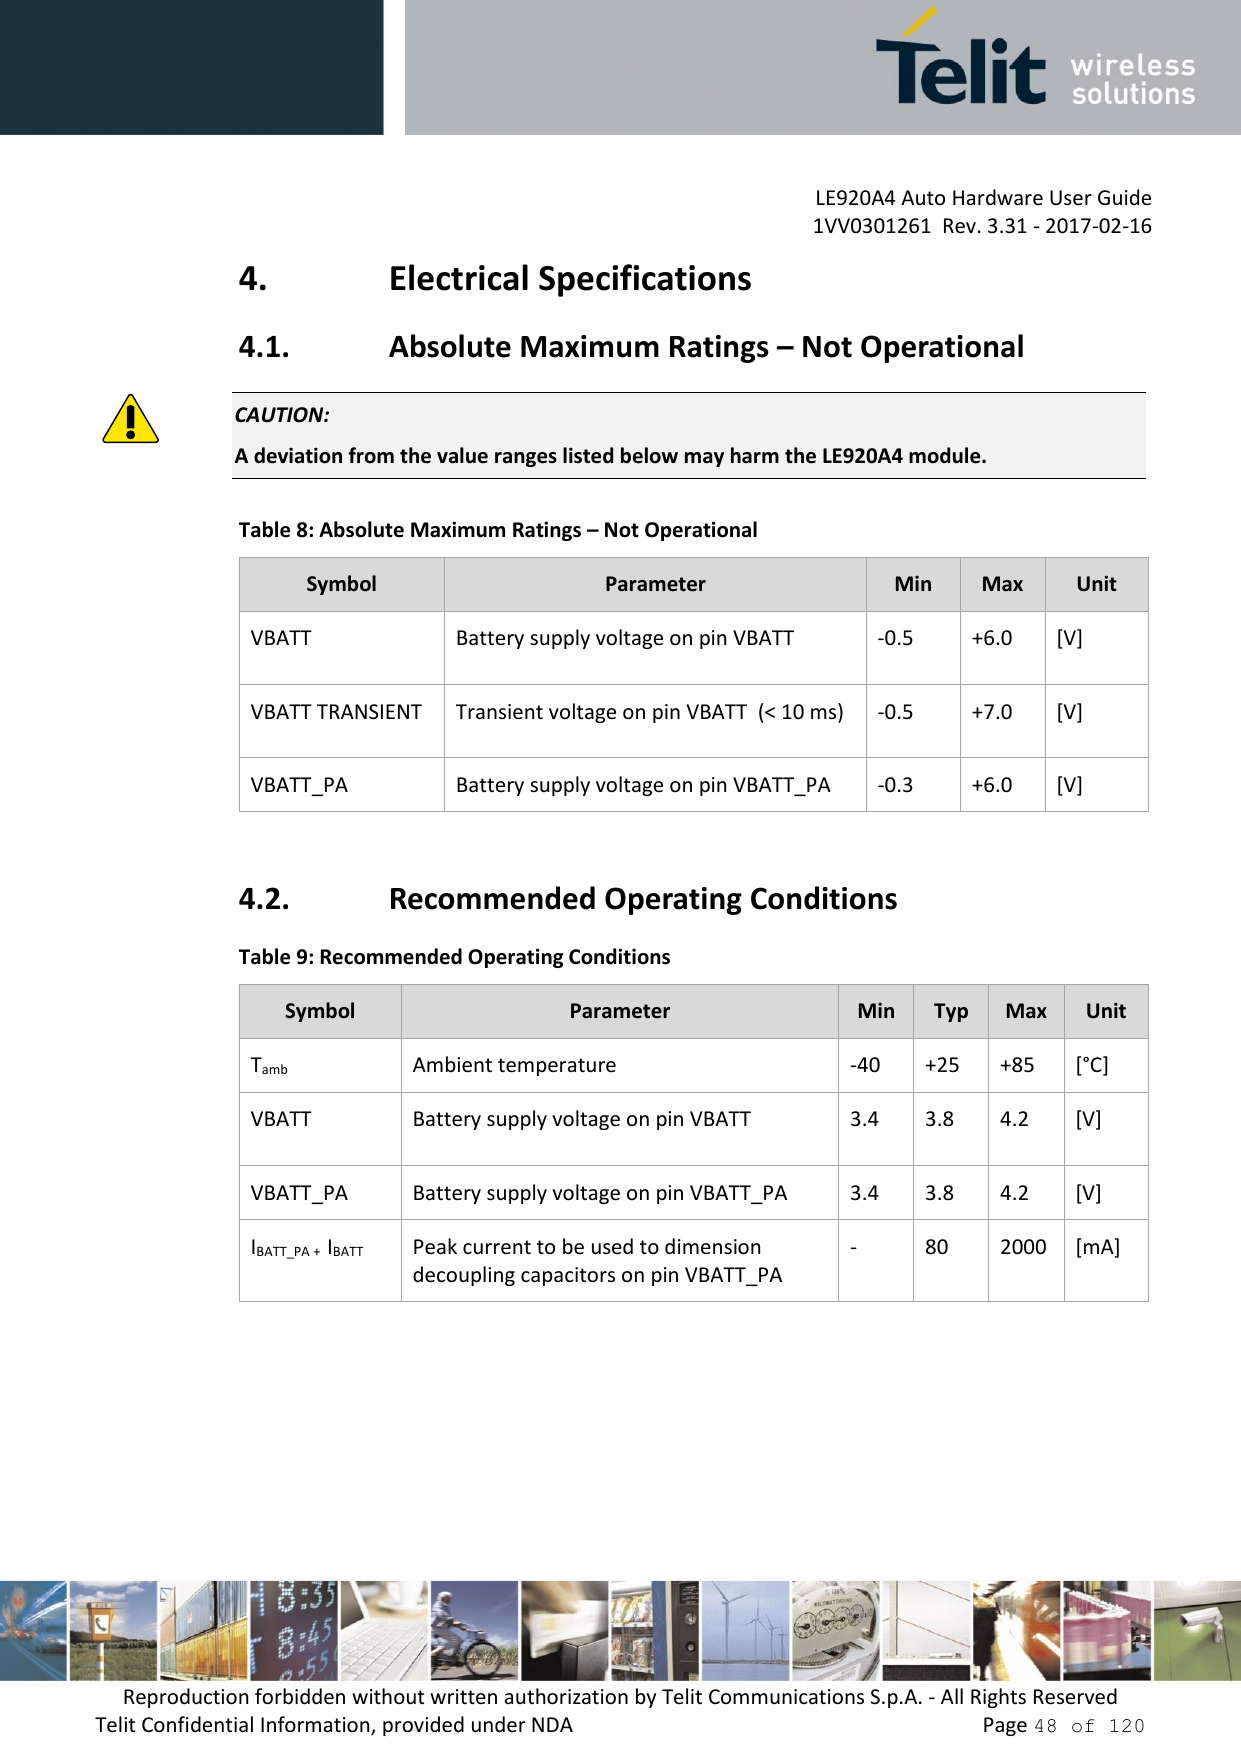         LE920A4 Auto Hardware User Guide     1VV0301261  Rev. 3.31 - 2017-02-16 Reproduction forbidden without written authorization by Telit Communications S.p.A. - All Rights Reserved Telit Confidential Information, provided under NDA                 Page 48 of 120 4. Electrical Specifications 4.1. Absolute Maximum Ratings – Not Operational  CAUTION: A deviation from the value ranges listed below may harm the LE920A4 module. Table 8: Absolute Maximum Ratings – Not Operational Symbol Parameter Min Max Unit VBATT Battery supply voltage on pin VBATT -0.5 +6.0 [V] VBATT TRANSIENT Transient voltage on pin VBATT  (&lt; 10 ms) -0.5 +7.0 [V] VBATT_PA Battery supply voltage on pin VBATT_PA -0.3 +6.0 [V]  4.2. Recommended Operating Conditions Table 9: Recommended Operating Conditions Symbol Parameter Min Typ Max Unit Tamb Ambient temperature -40 +25 +85 [°C] VBATT Battery supply voltage on pin VBATT 3.4 3.8 4.2 [V] VBATT_PA Battery supply voltage on pin VBATT_PA 3.4 3.8 4.2 [V] IBATT_PA +  IBATT Peak current to be used to dimension decoupling capacitors on pin VBATT_PA - 80 2000 [mA]     